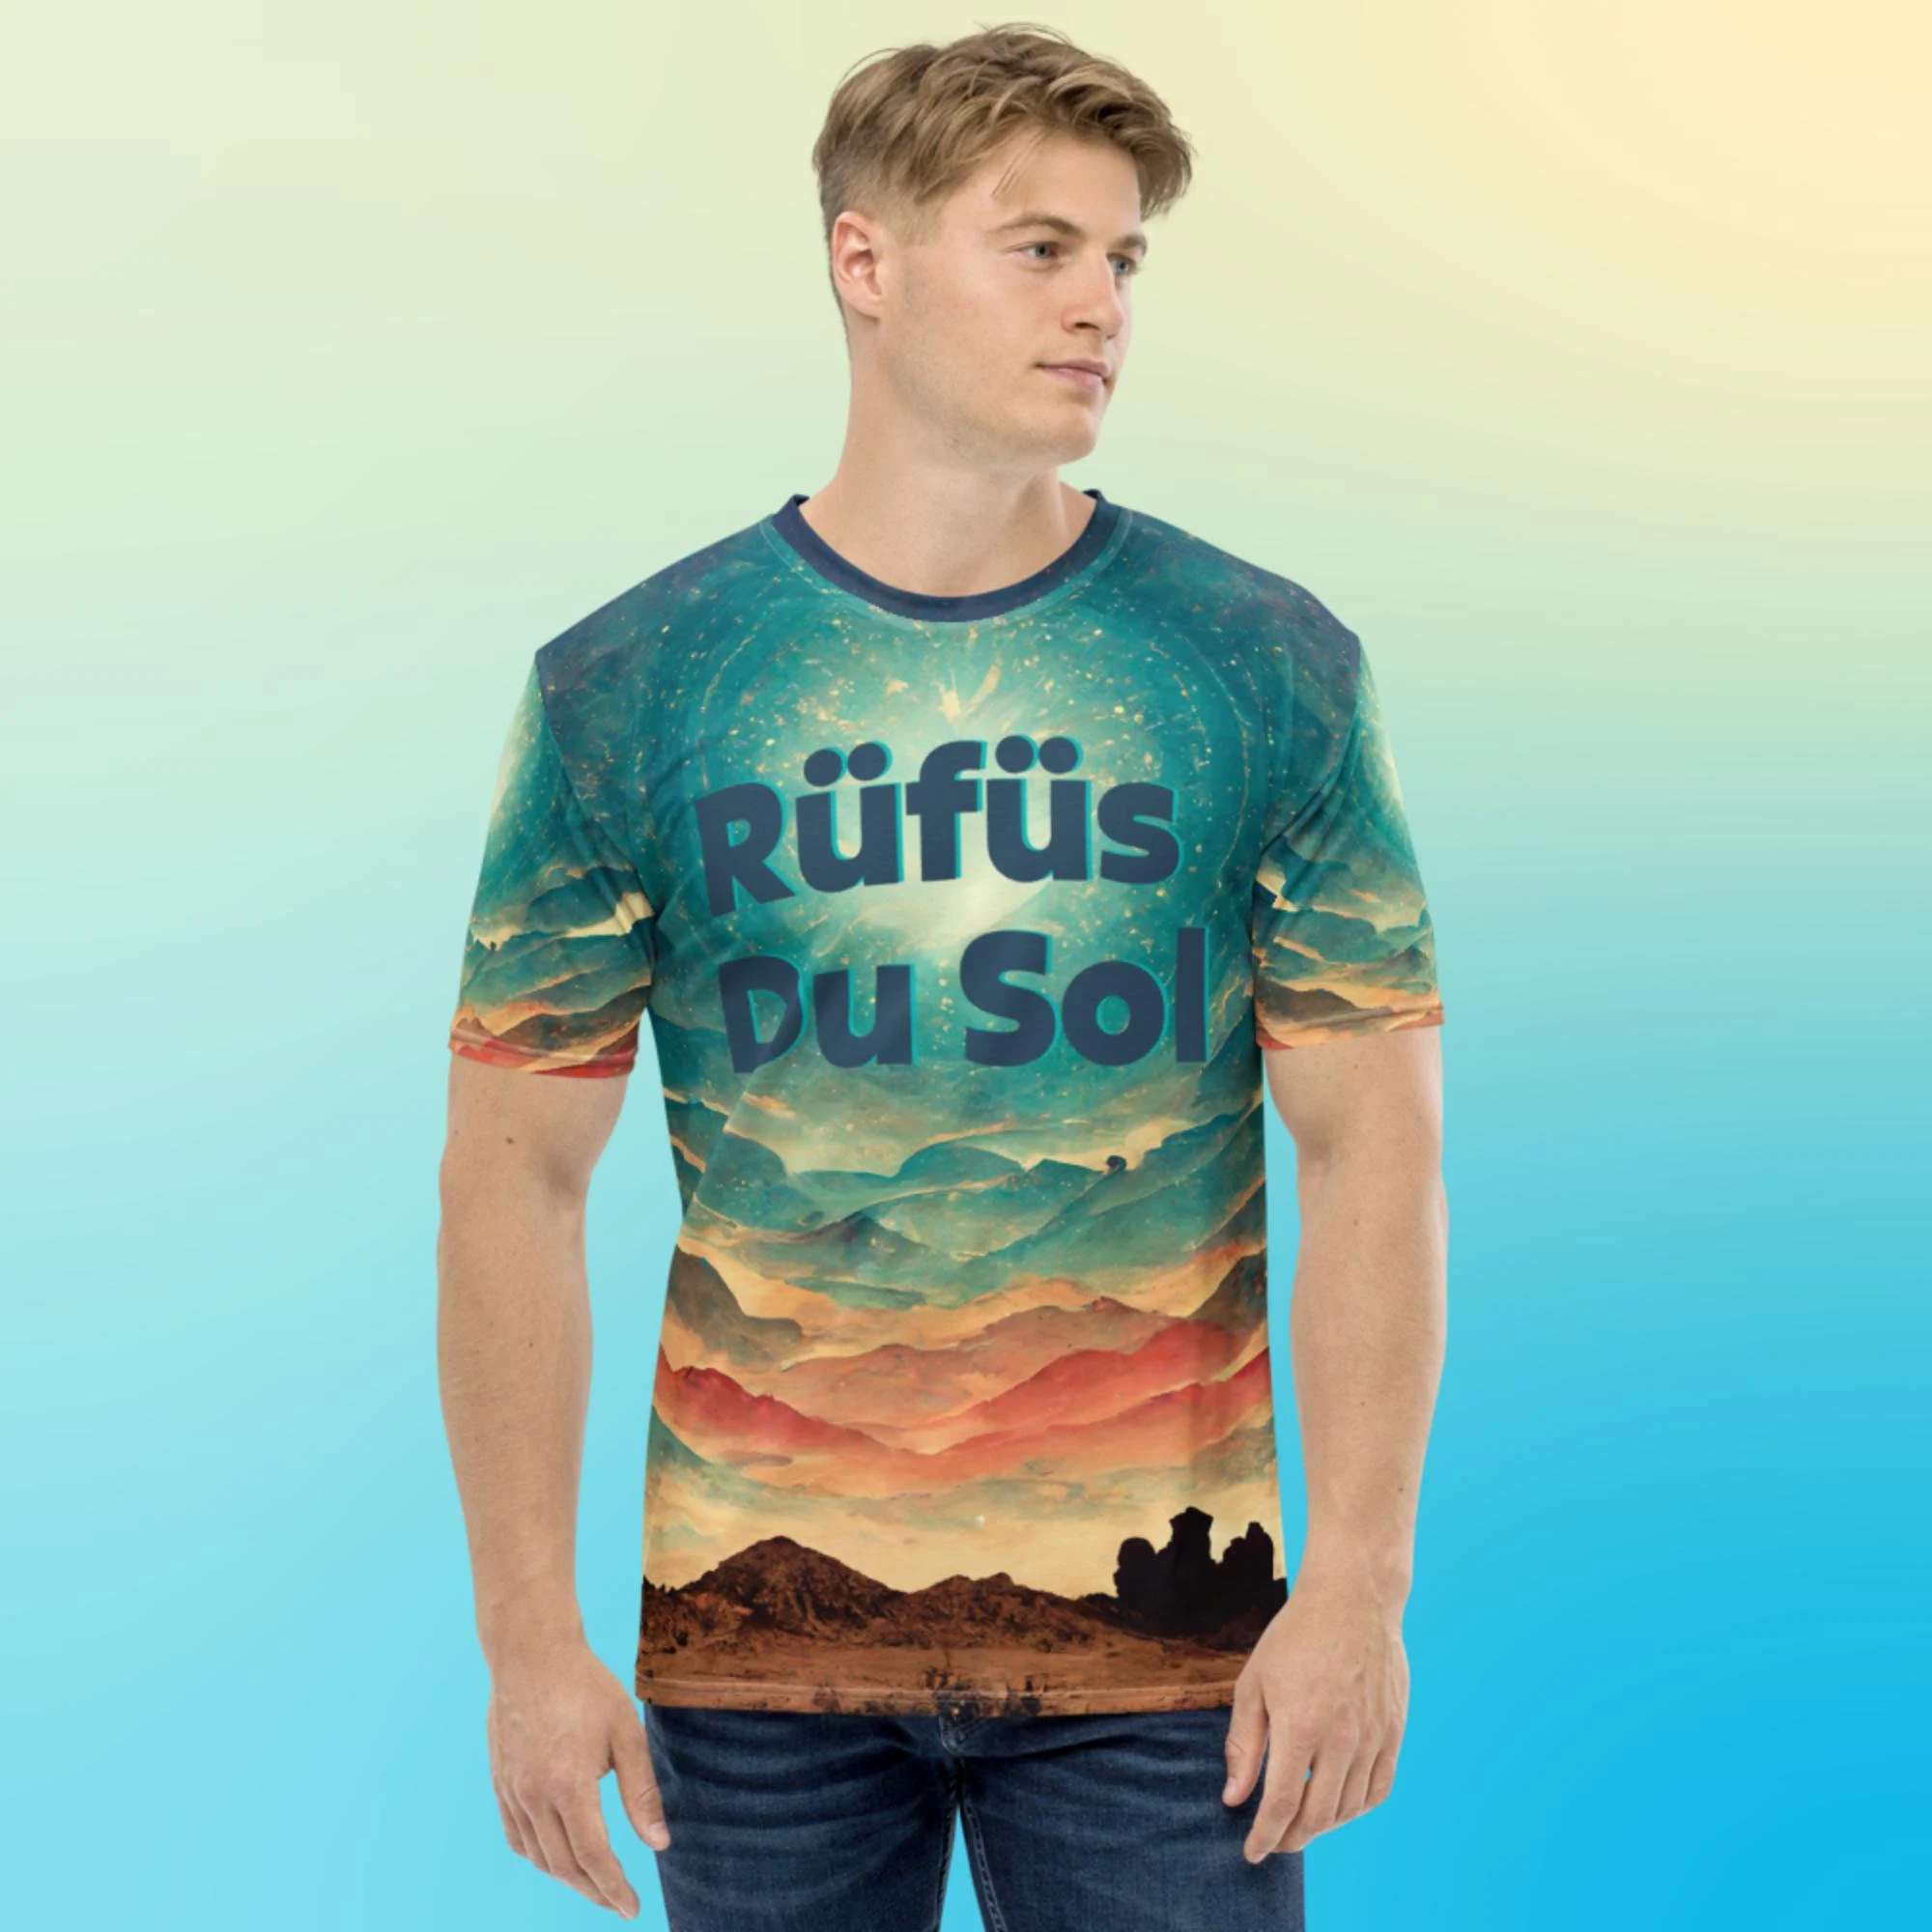 Rufus Du Sol Official Merch: Embrace the Soundtrack of Your Life